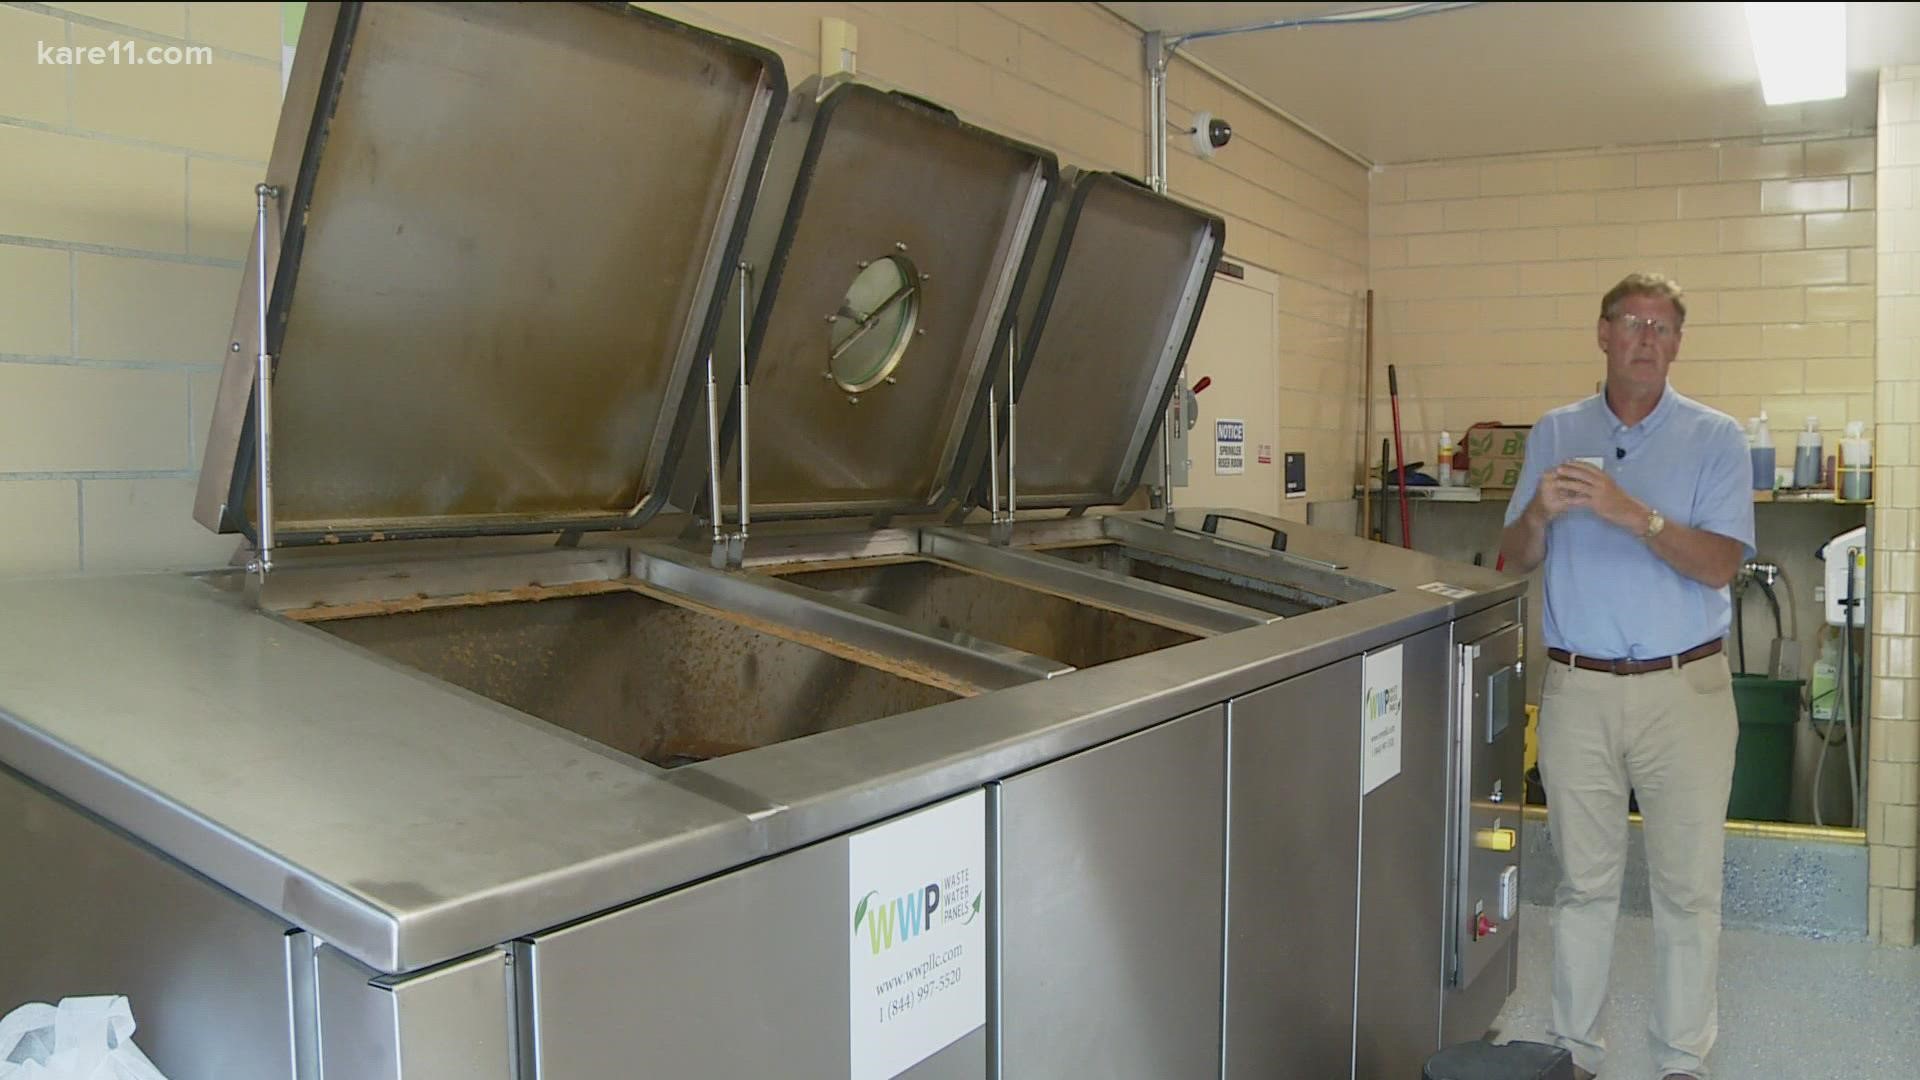 The elementary school in Fridley is using state-of-the-art techniques to turn trash and recycling into valuable resources.